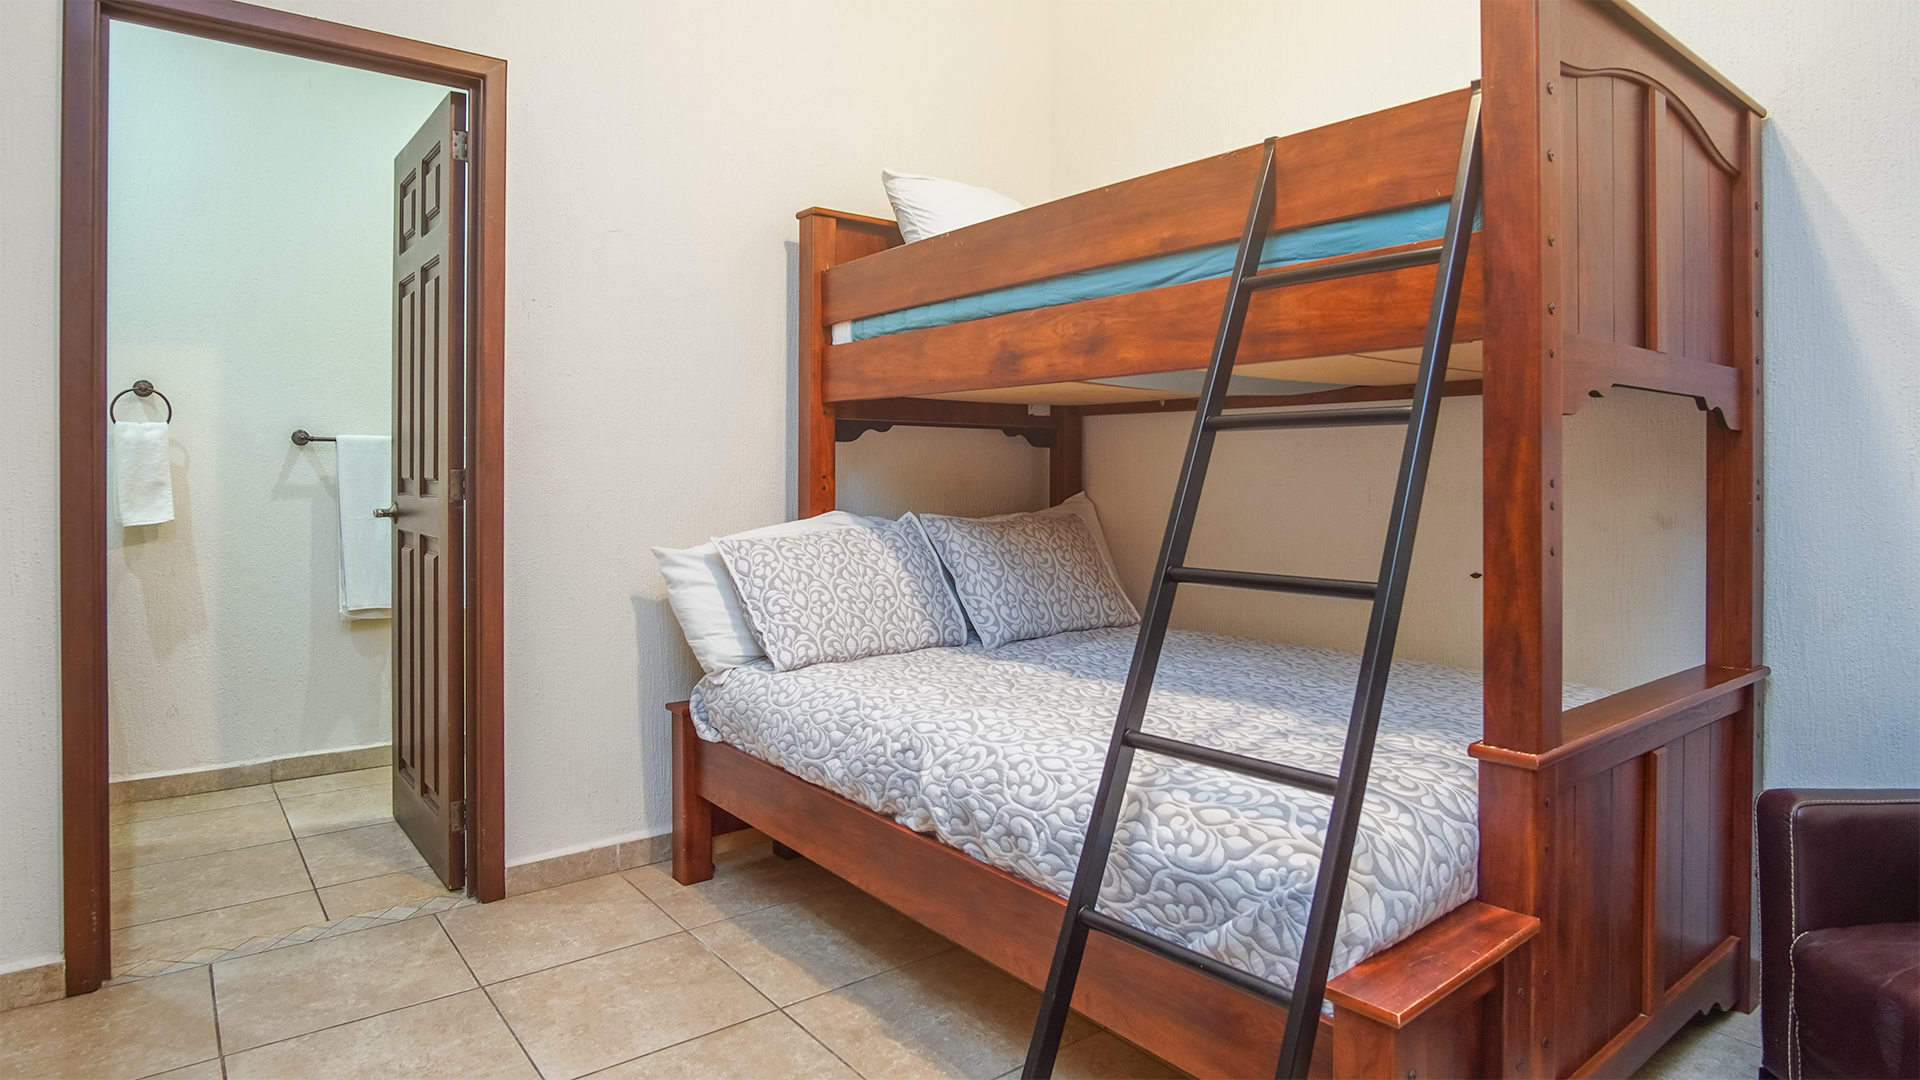 The fourth bedroom features oversized bunk beds, and its own attached bathroom.